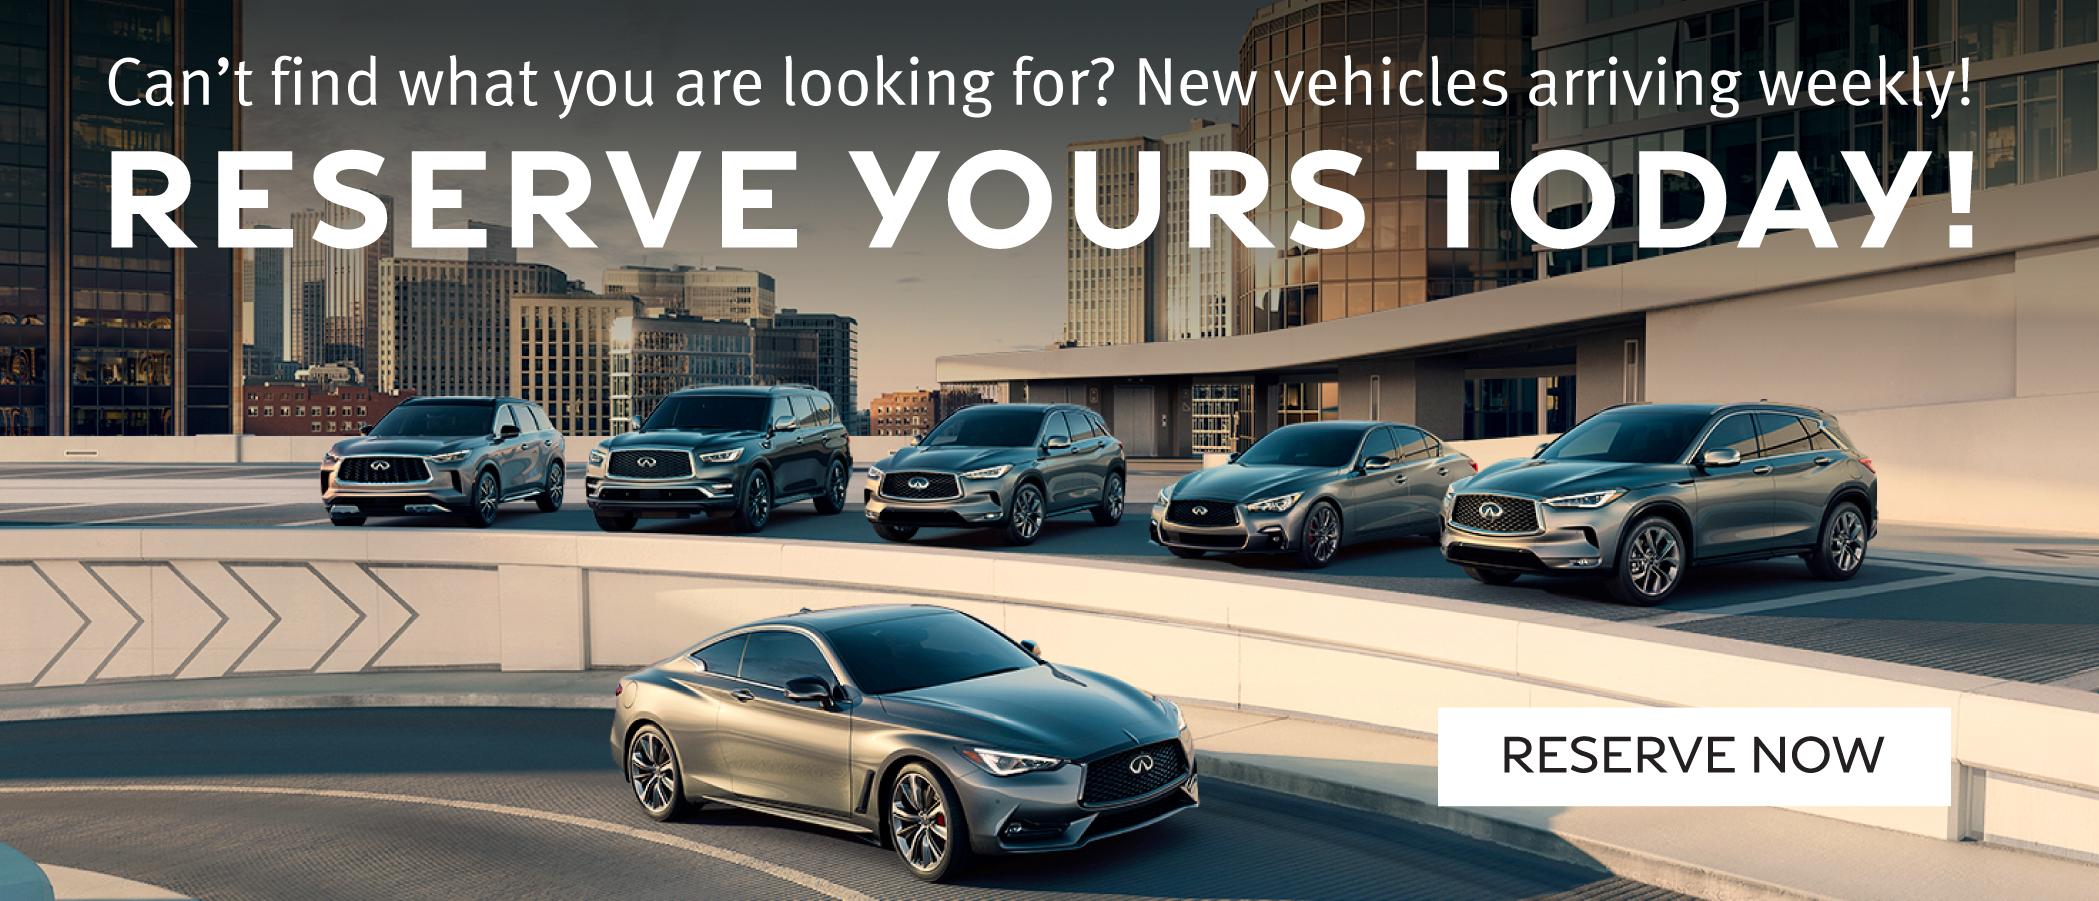 Reserve yours today Infiniti